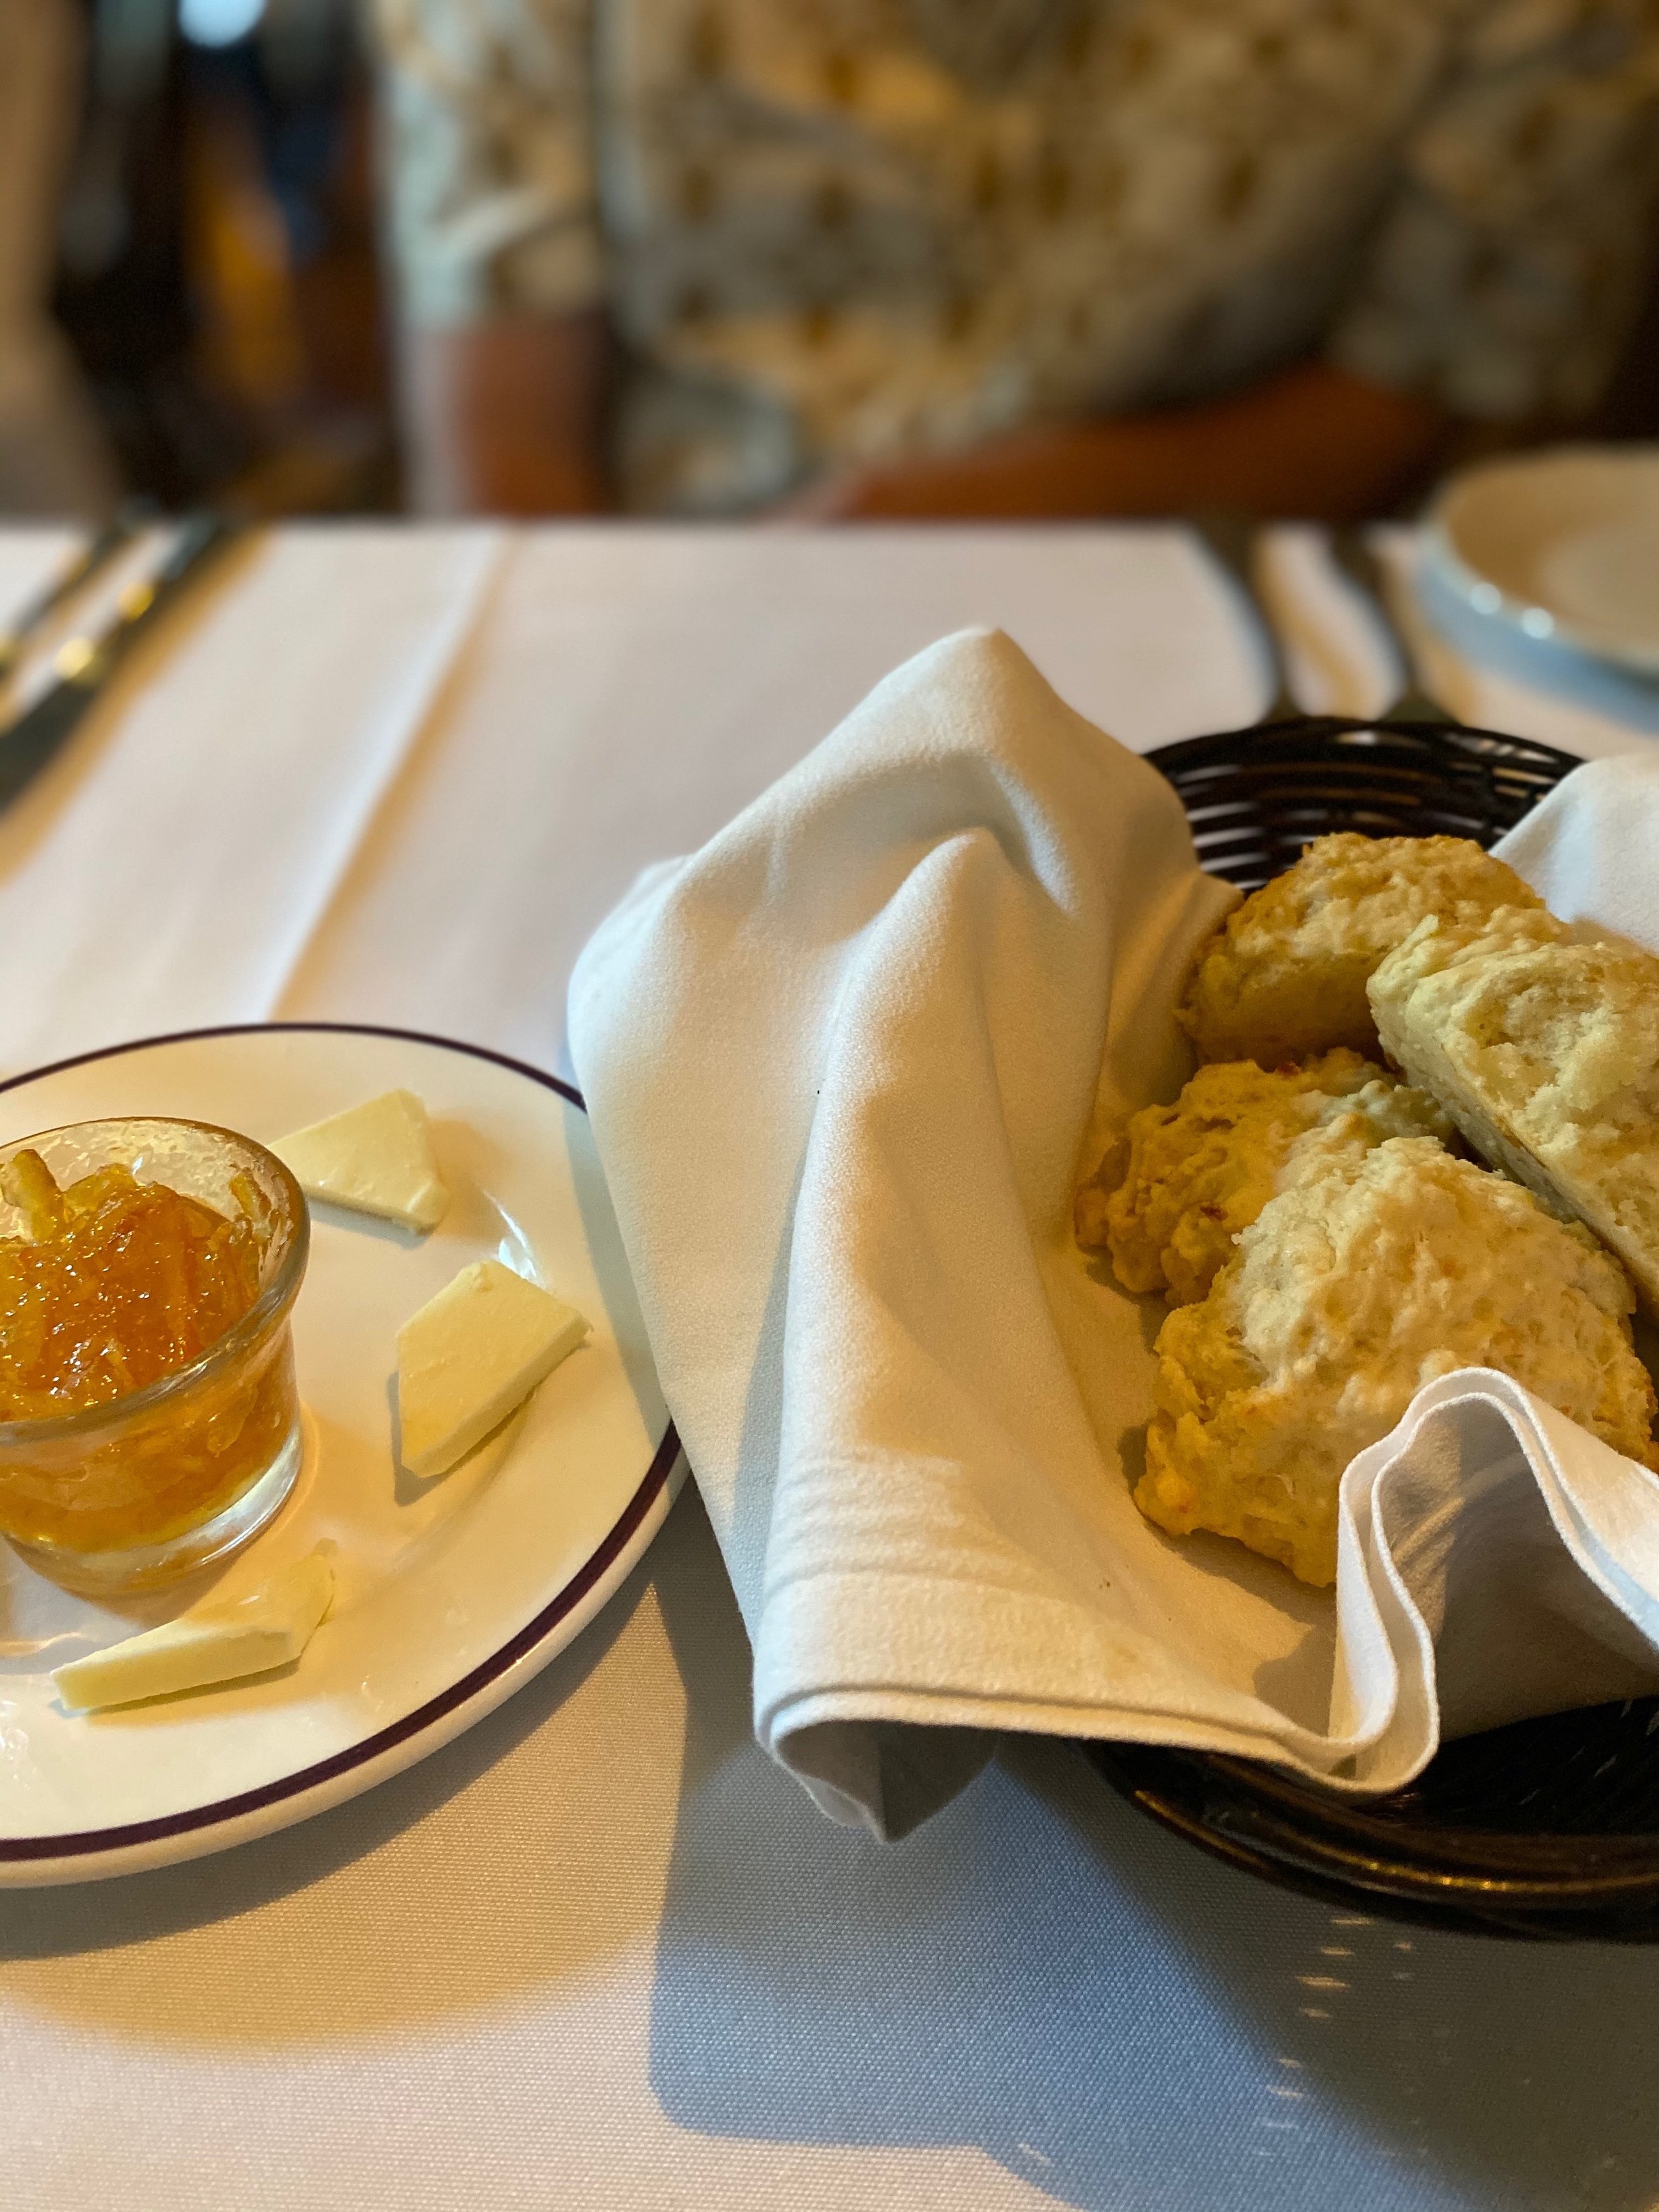 Here are our cheese biscuits, served with butter and marmalade. Because butter is not enough.